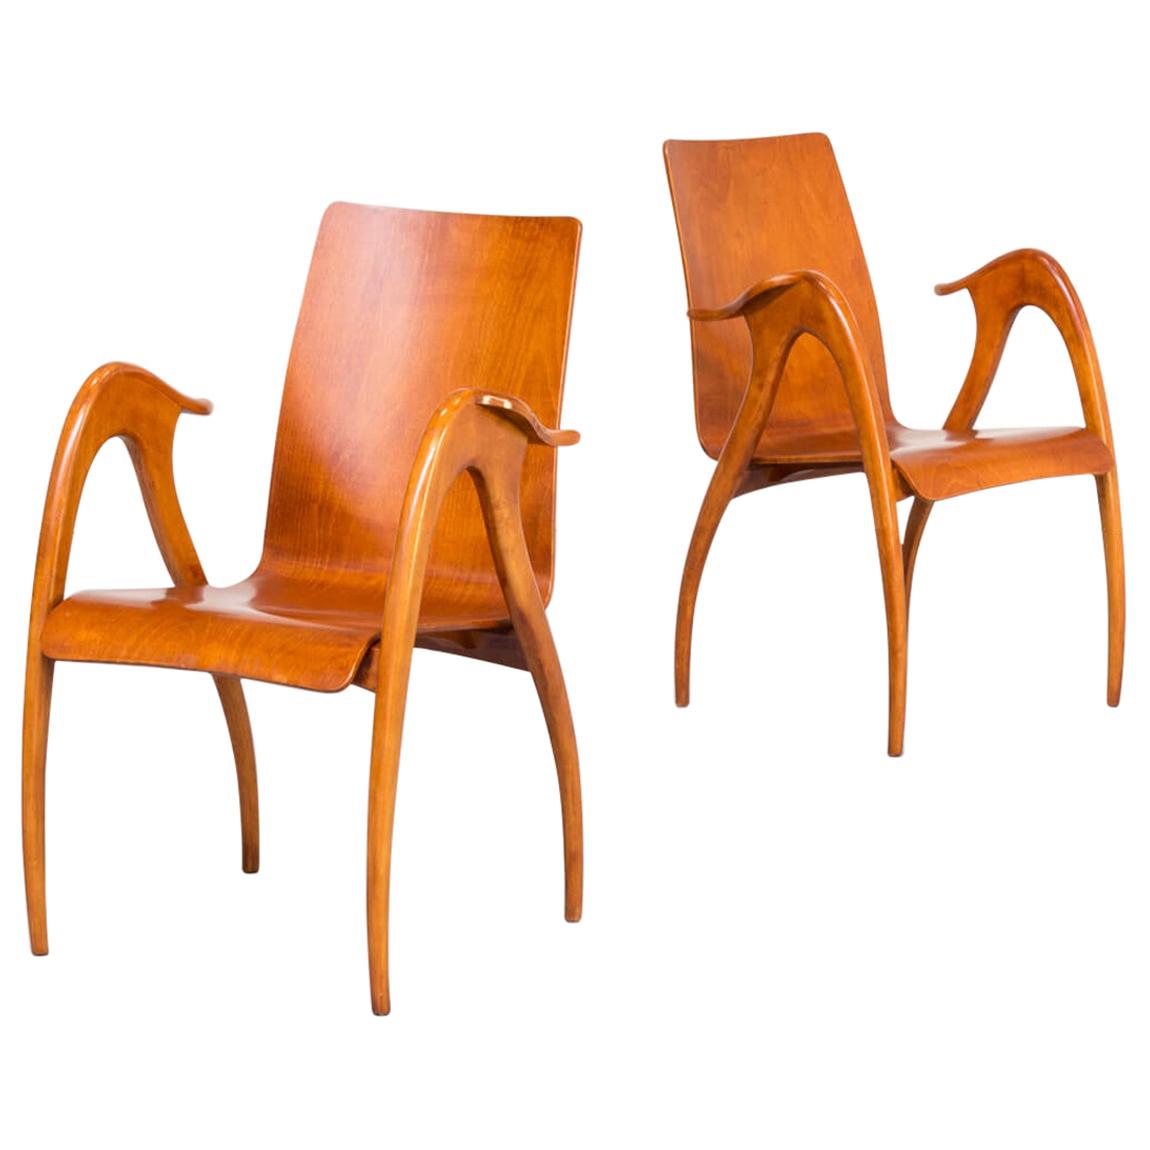 1950s Pair of Sculptural Armchairs in Walnut for Malatesta and Mason For Sale